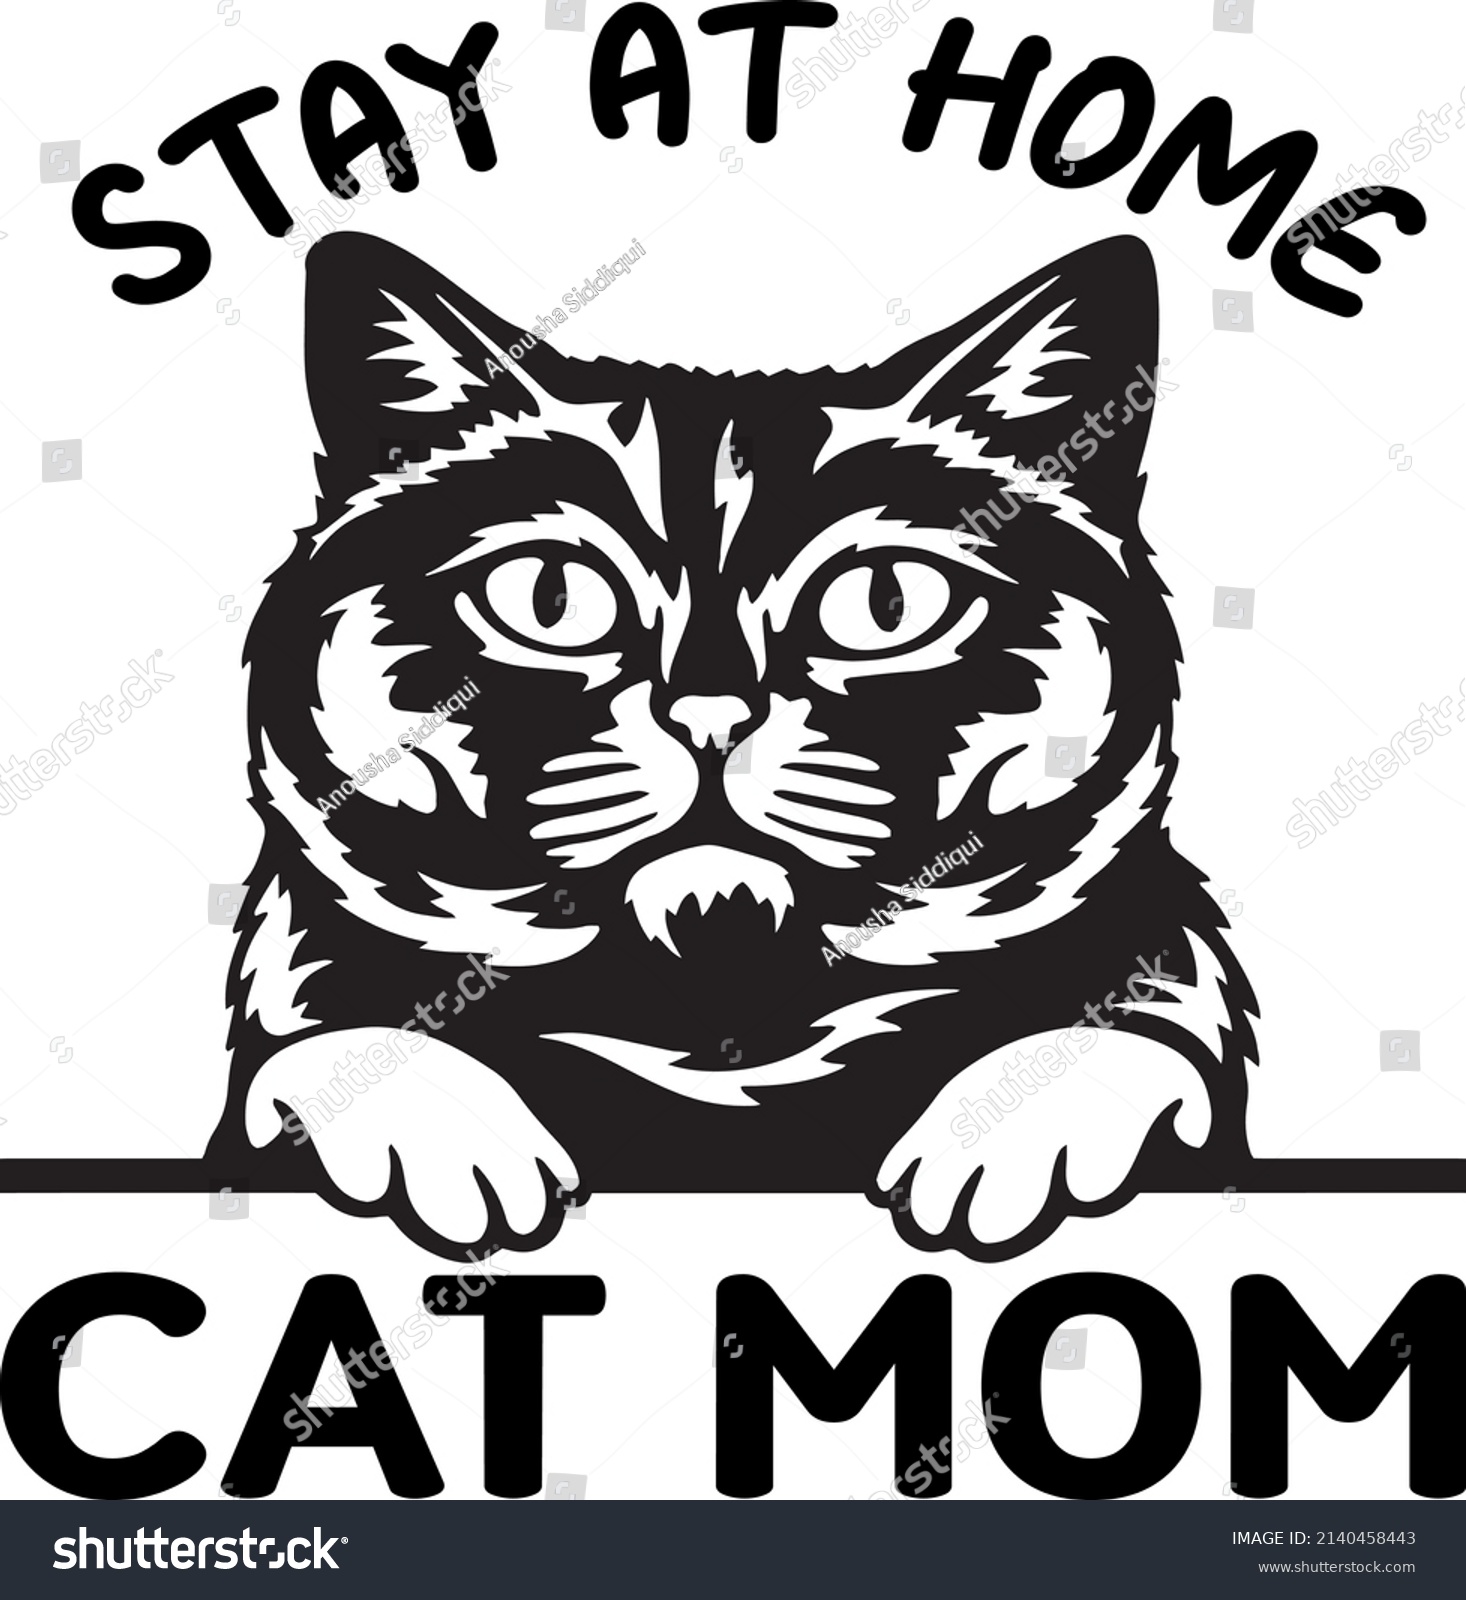 SVG of STAY AT HOME CAT MOM , Cat SVG Silhouette Tshirt Design for Cat Lovers svg